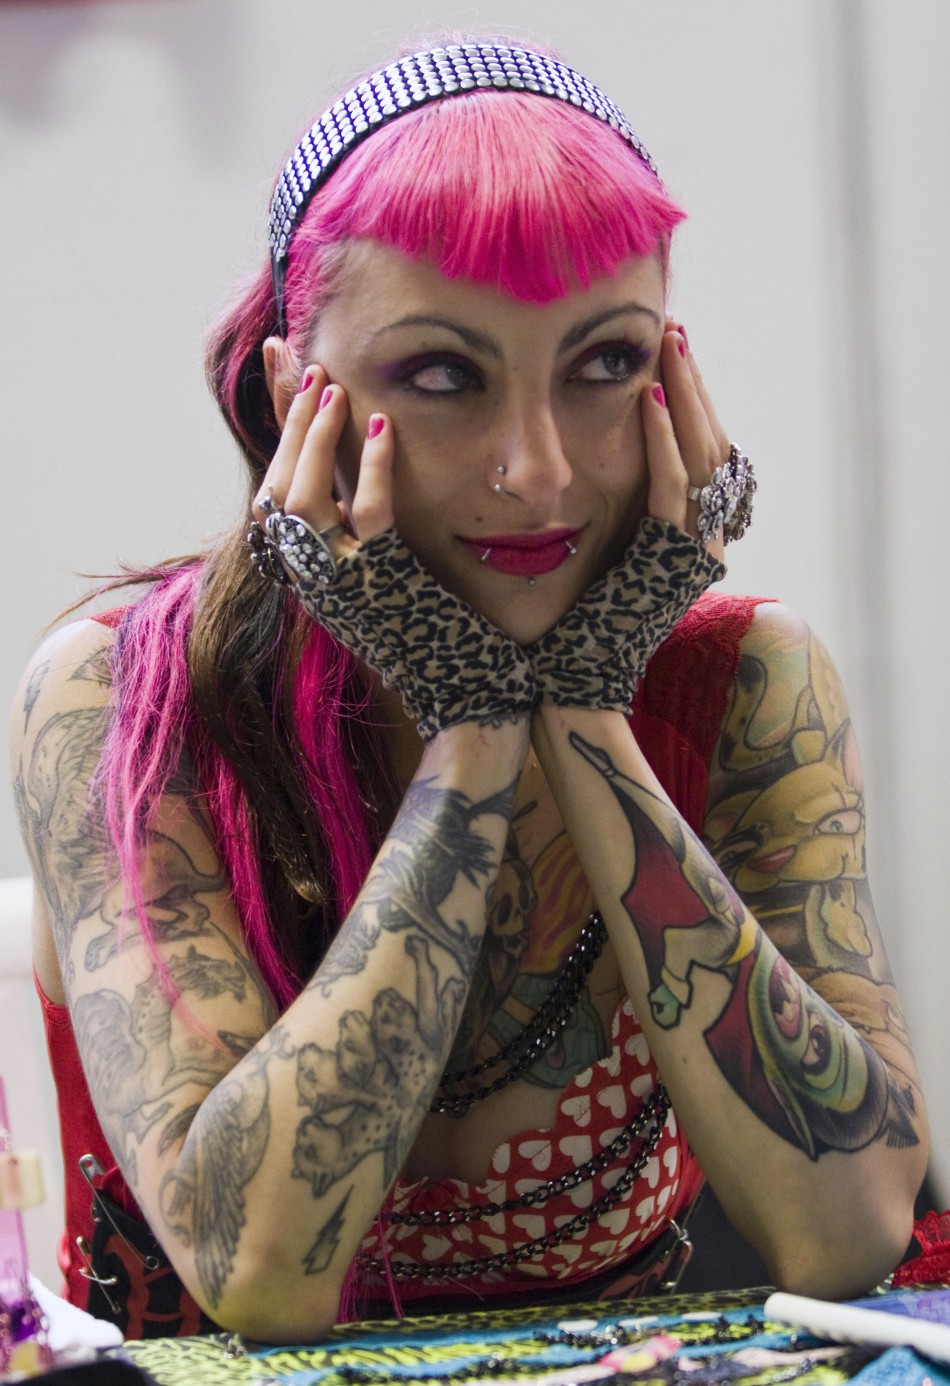 Oddly Tattooed and Bizarrely Pierced People